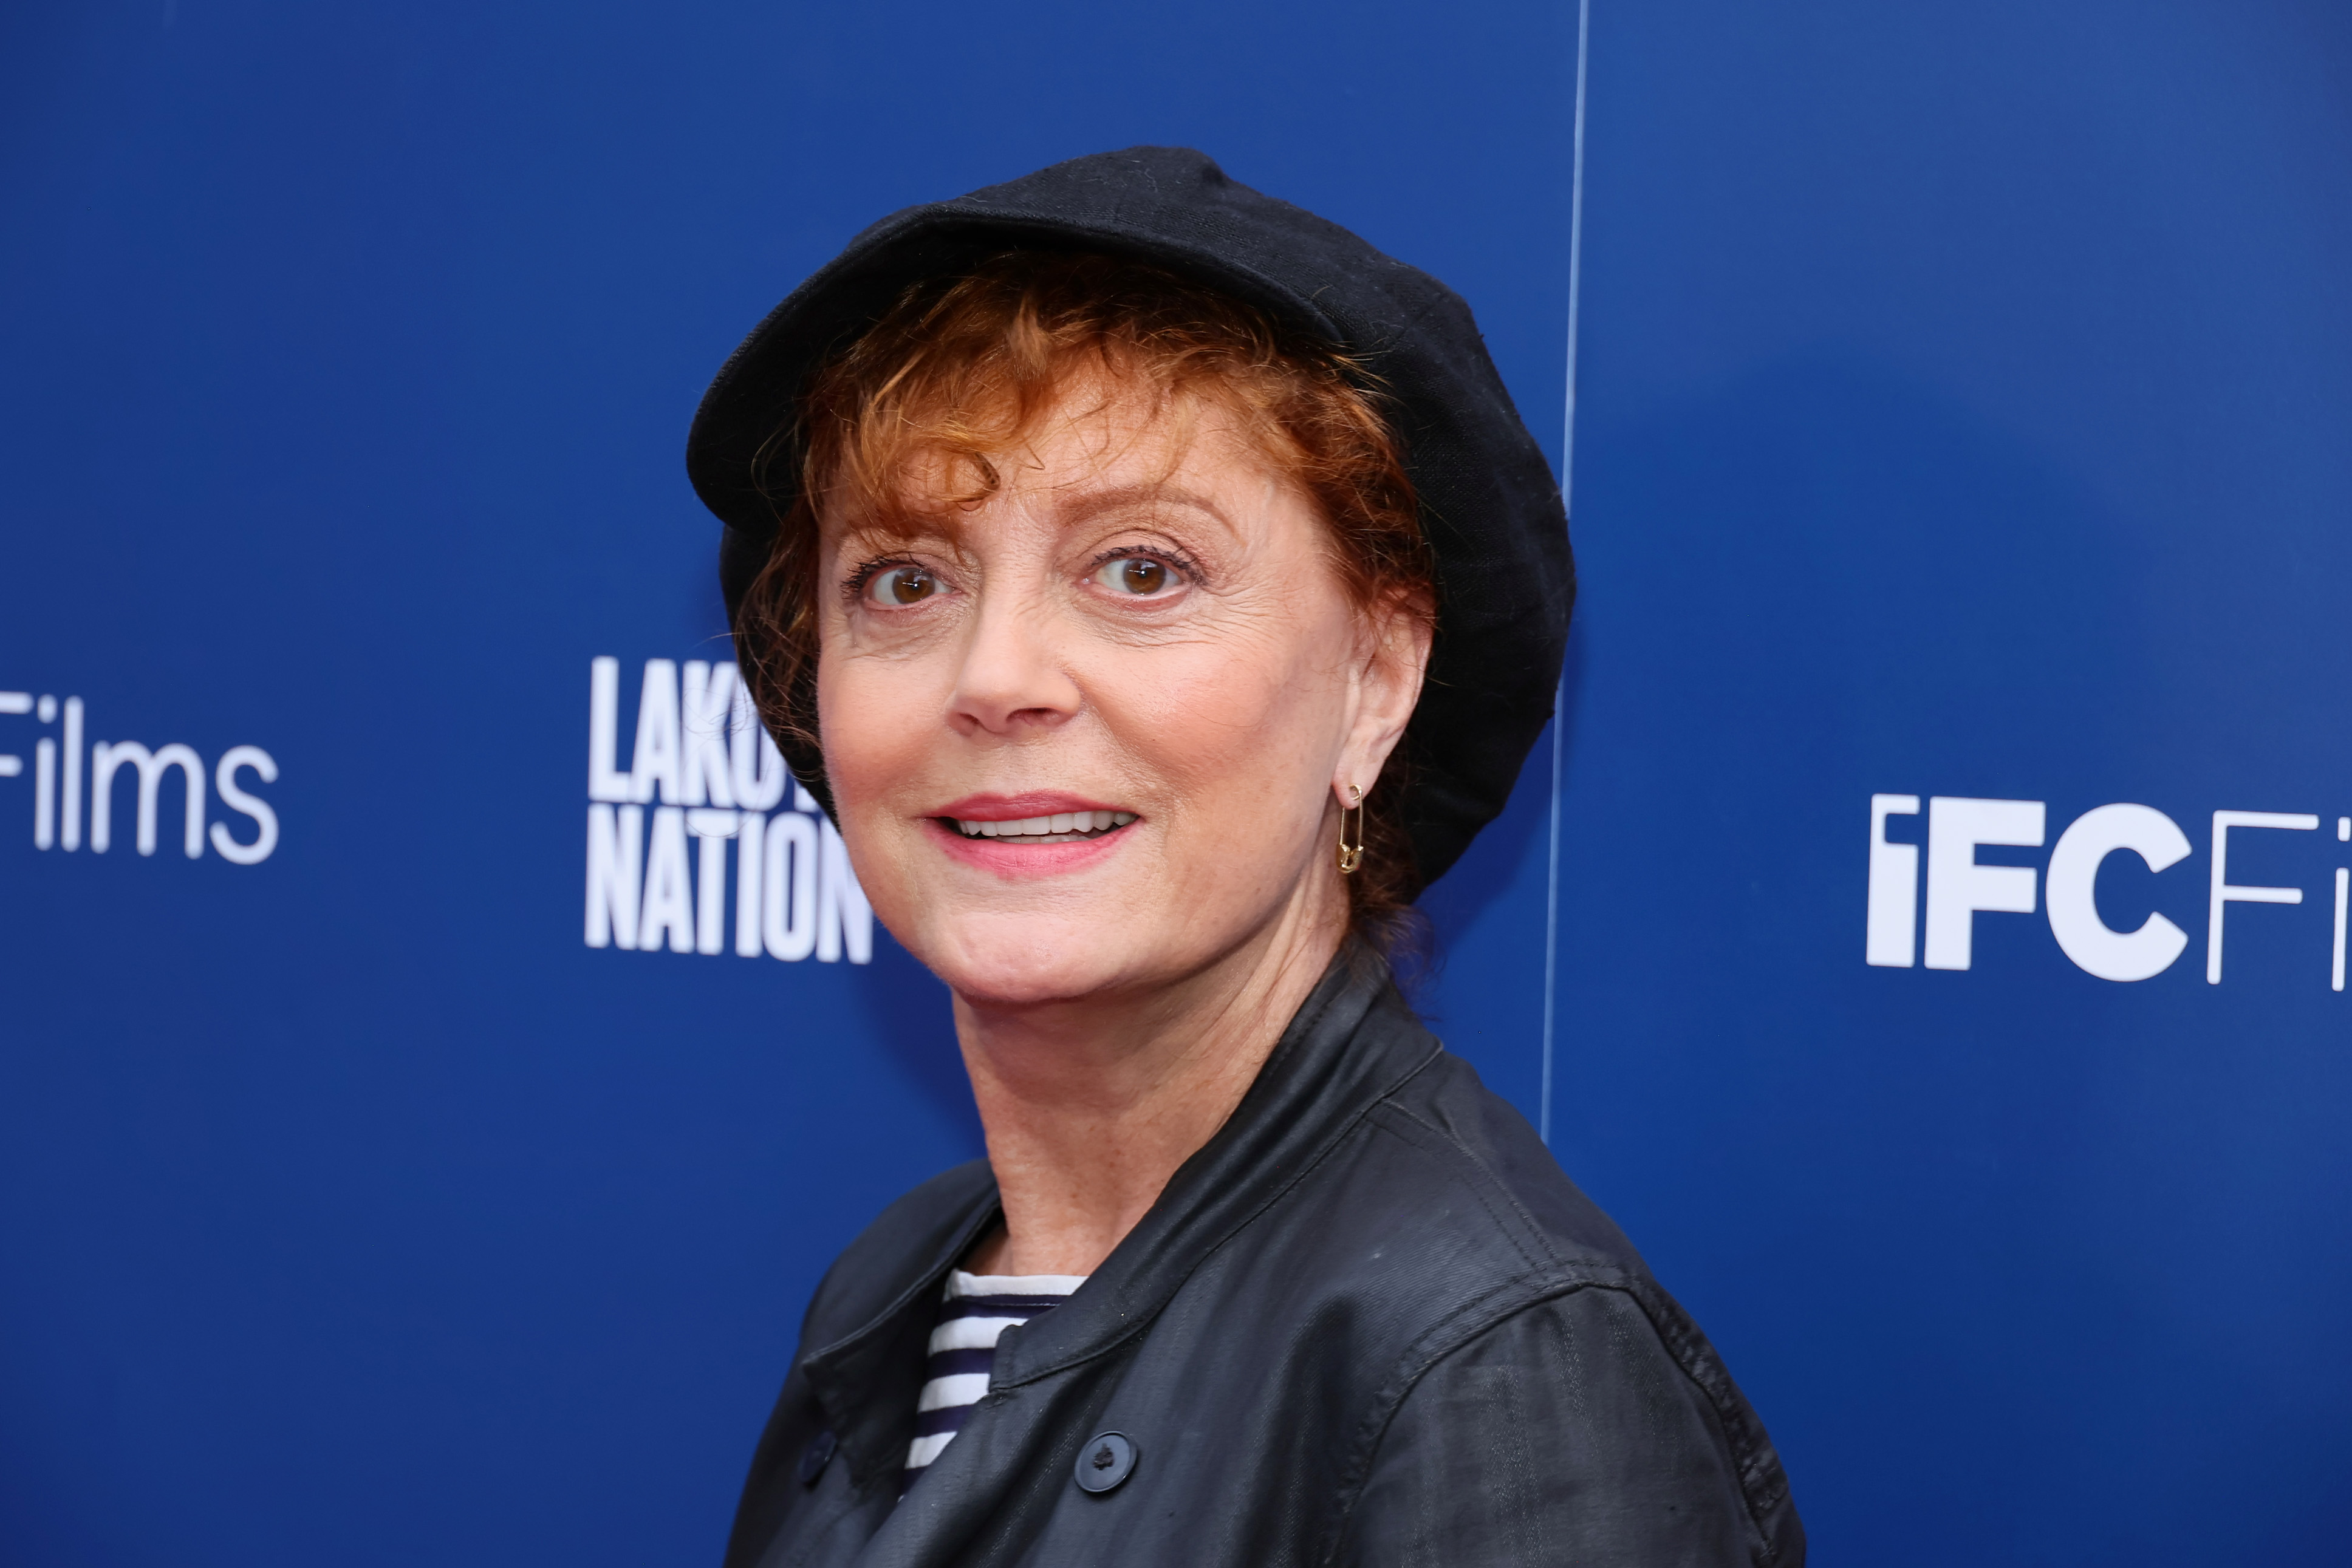 Susan Sarandon at the premiere of "Lakota Nation Vs United States" on June 26, 2023, in New York City. | Source: Getty Images